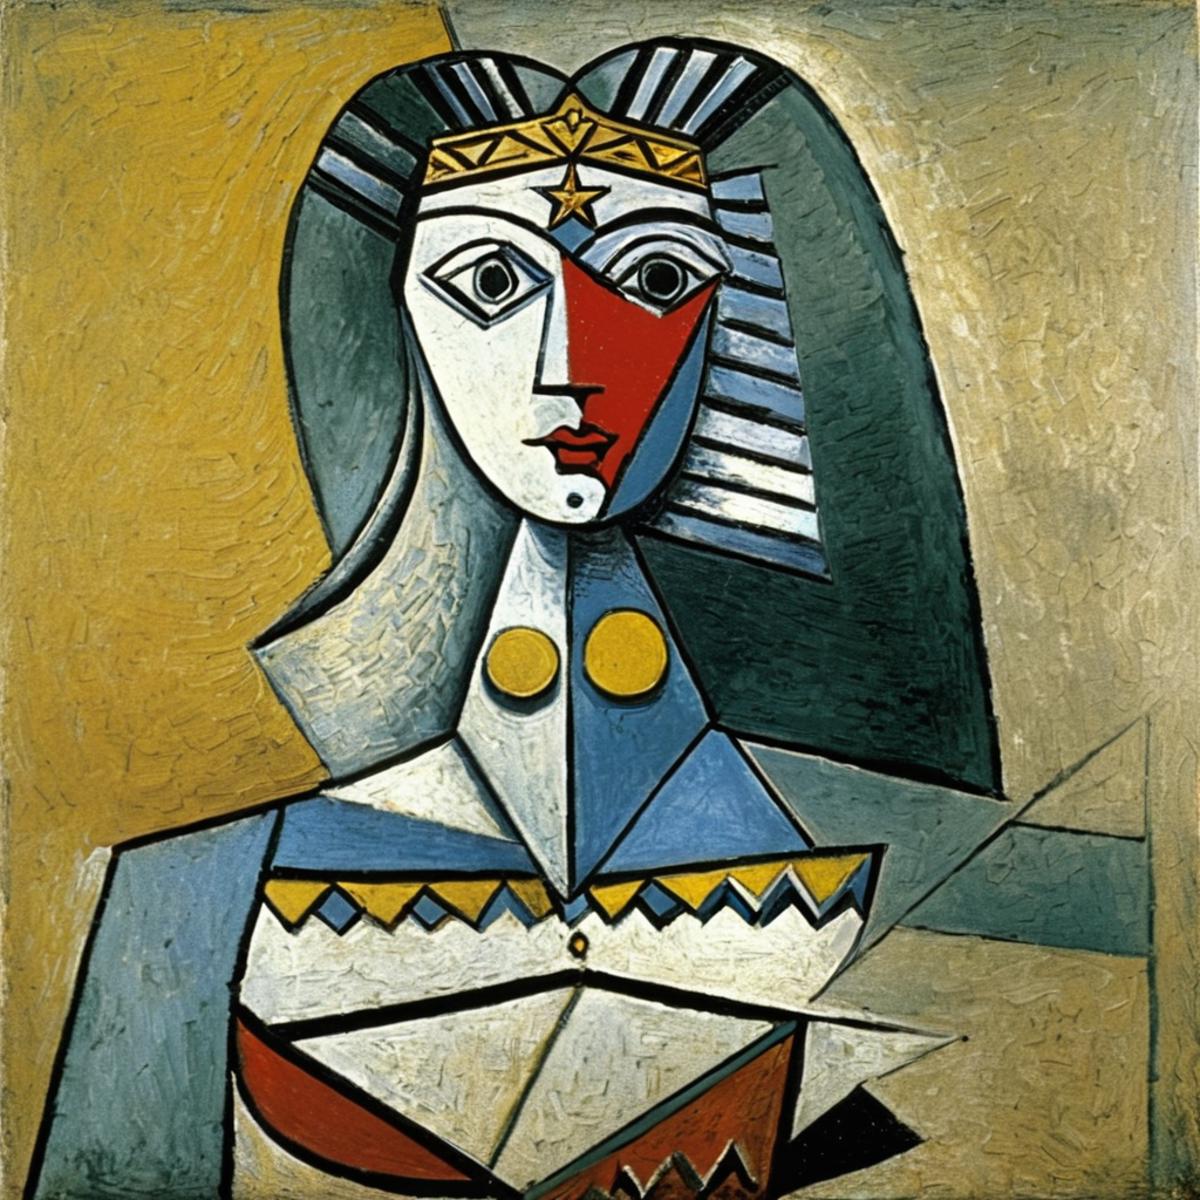 A painting of a woman wearing a gold crown and a red star above her eye.